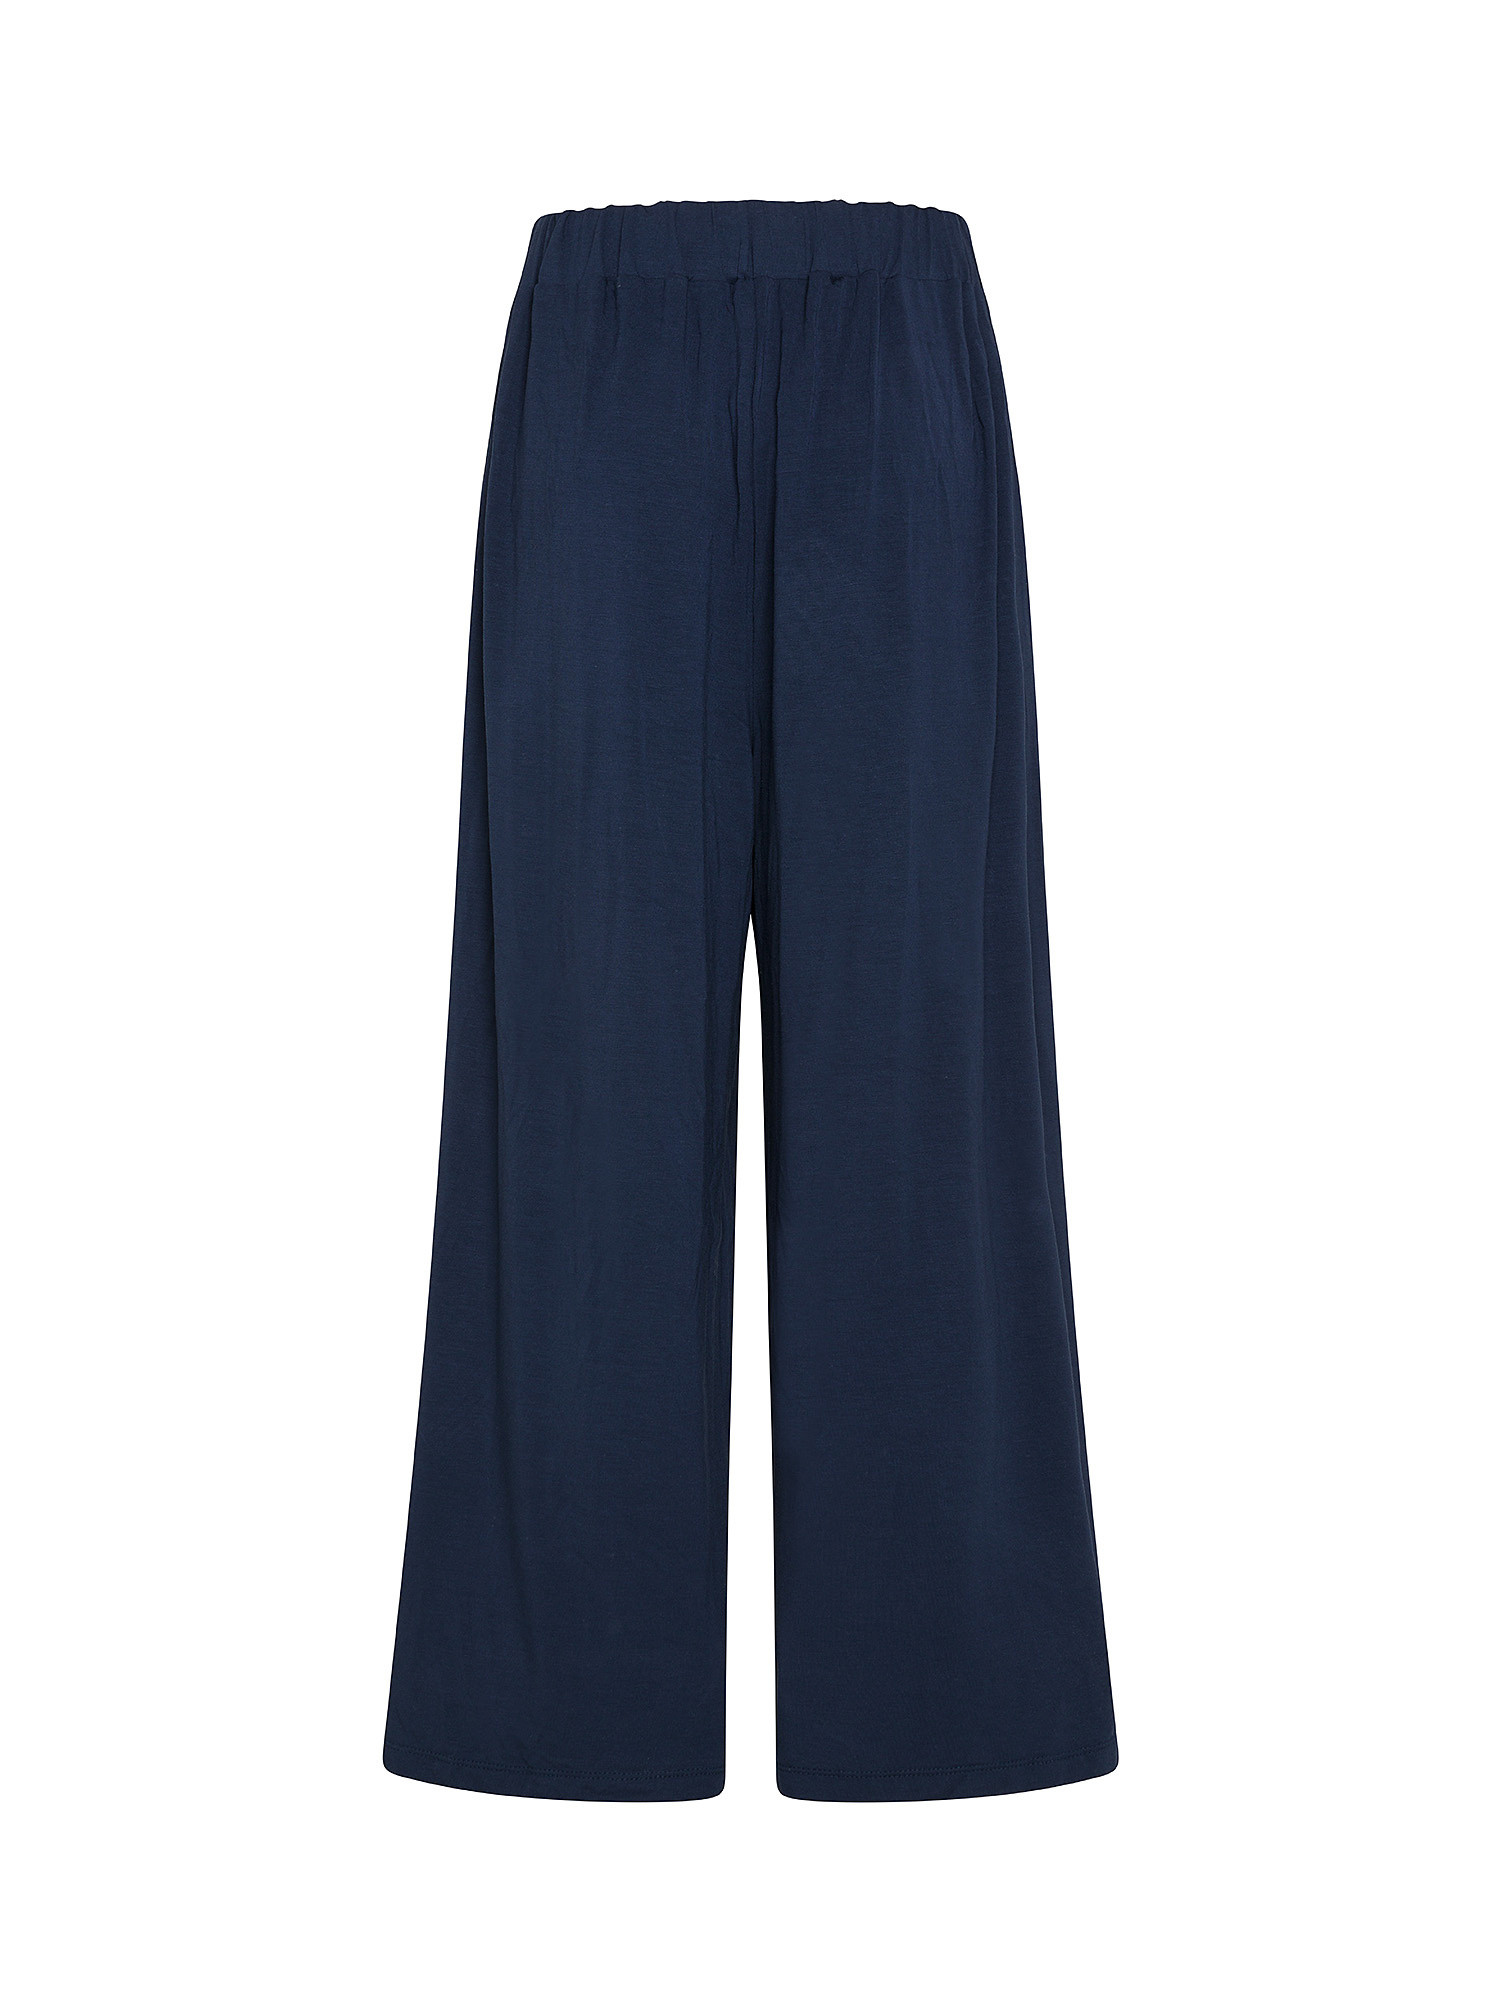 Solid color bamboo viscose trousers, Blue, large image number 1